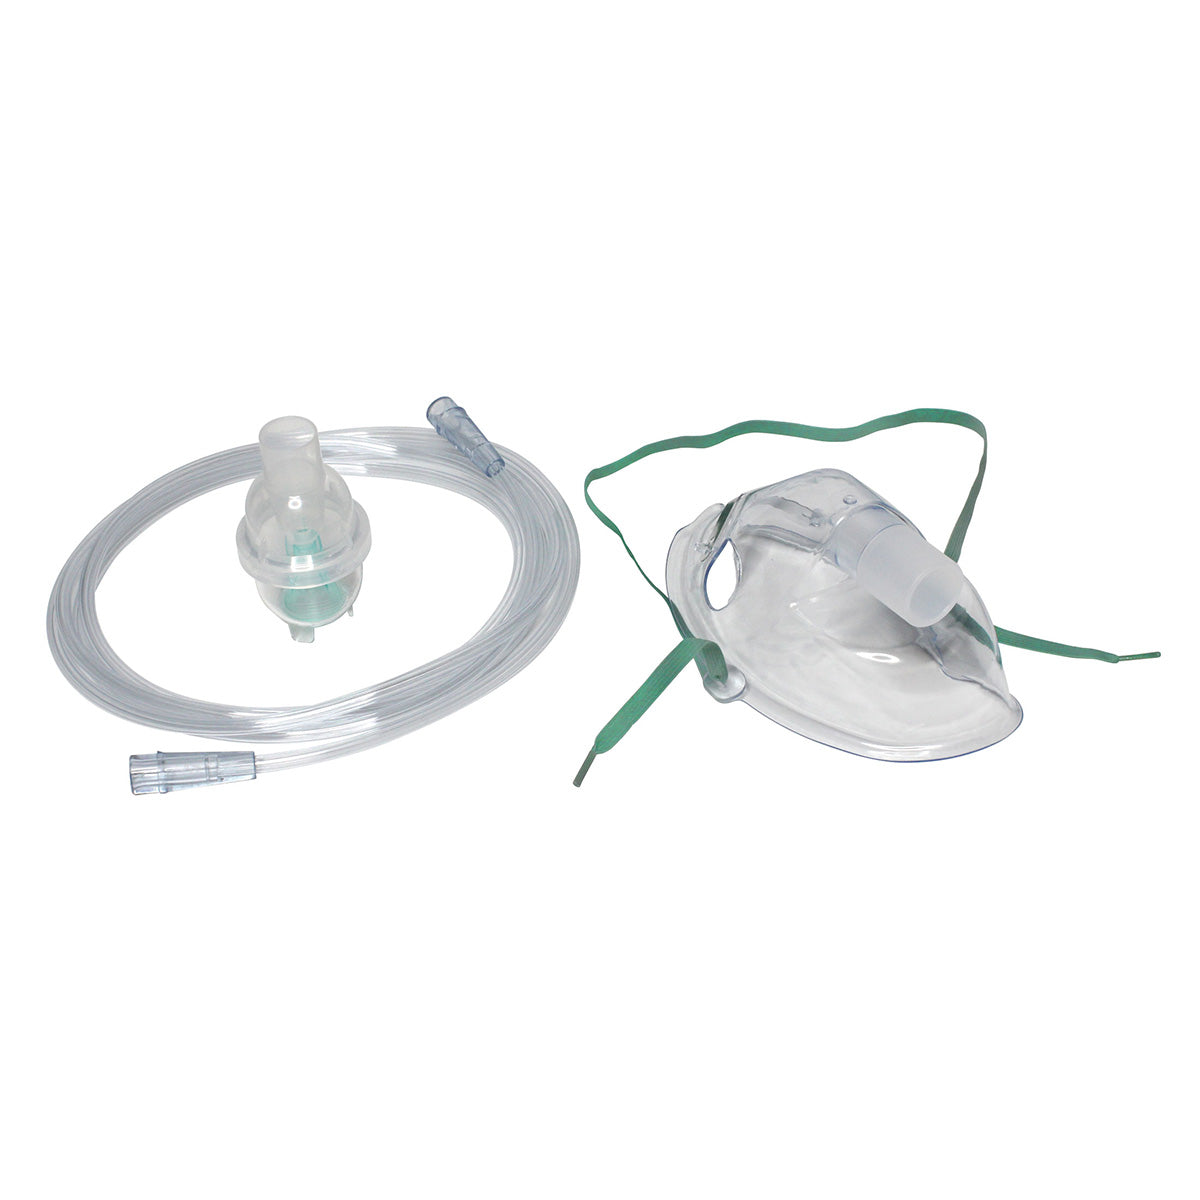 Sunset Disposable Nebulizer Kit with Adult Mask & 7 Foot Tubing